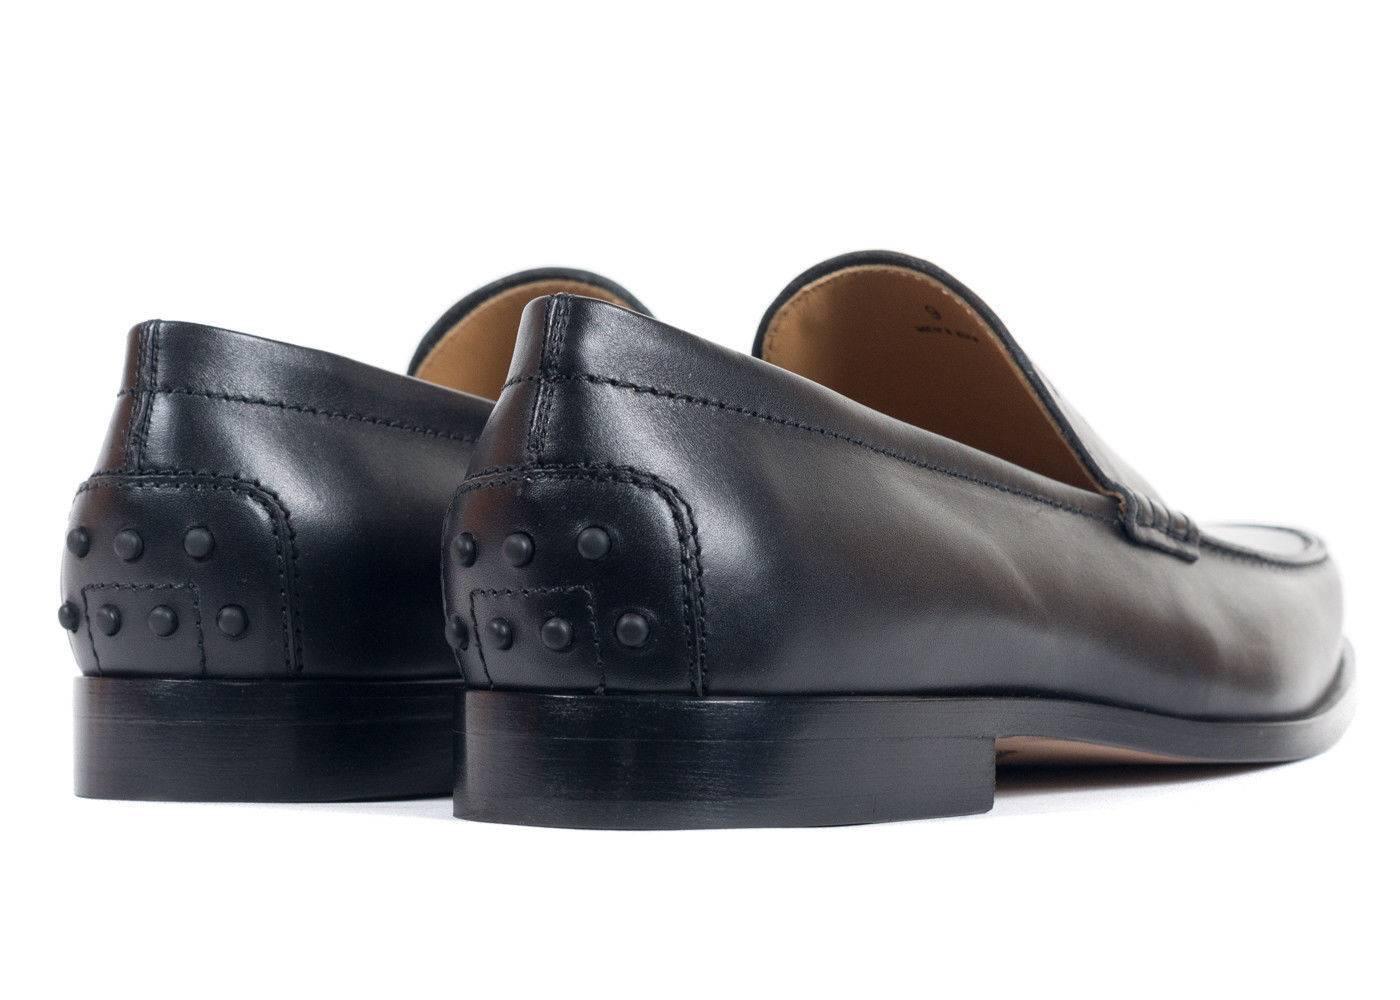 Tod's classic penny loafers crafted in black calfskin leather for an ultra smooth look to these shoes. These loafers are the perfect pair to wear to work or as an everyday shoe. Pair it with your favorite black trousers and or dark washed jeans for